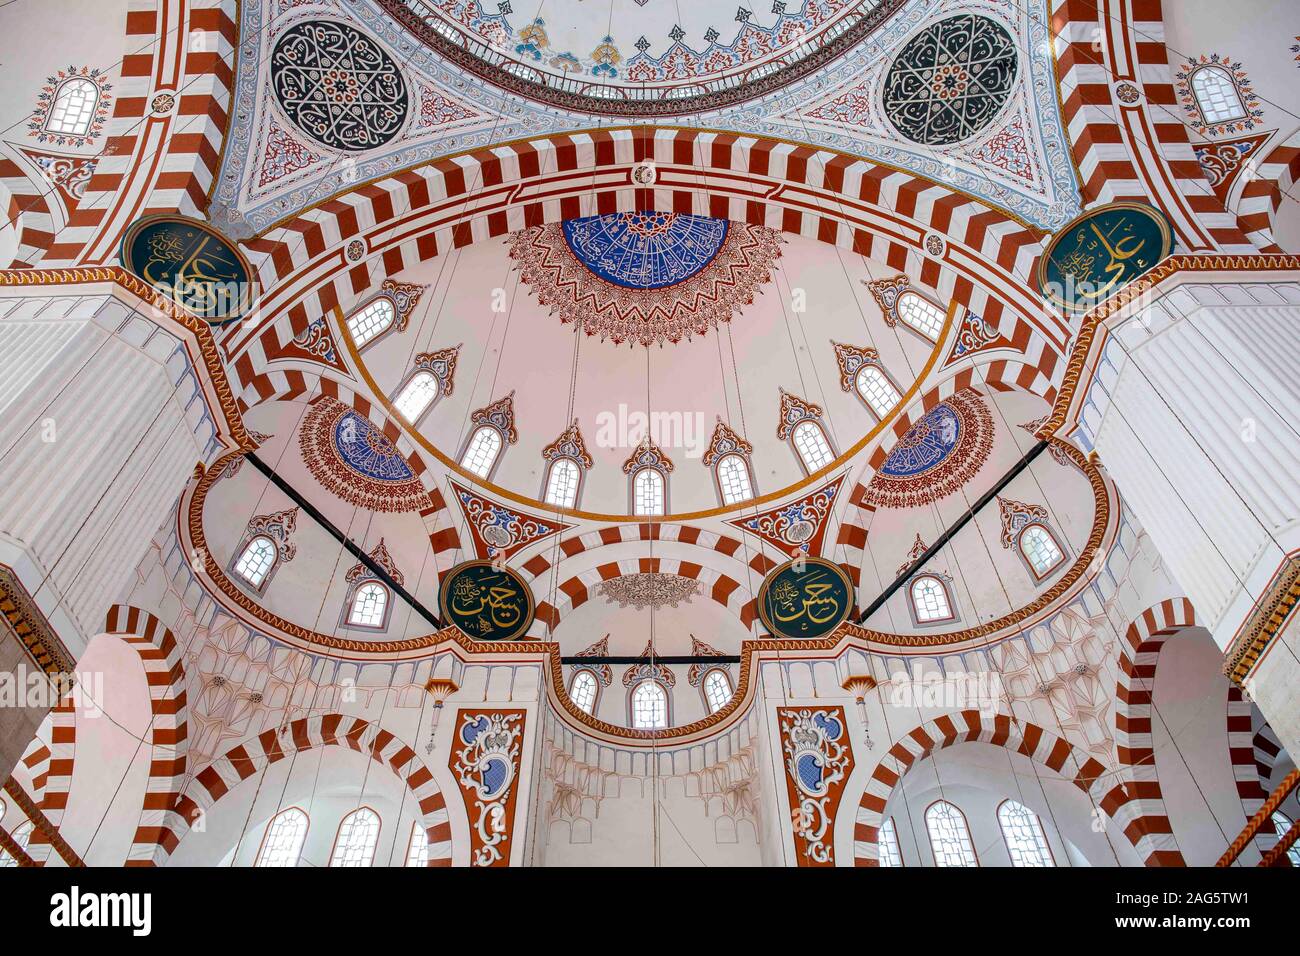 Sehzade mosque in Istanbul, Turkey. Stock Photo